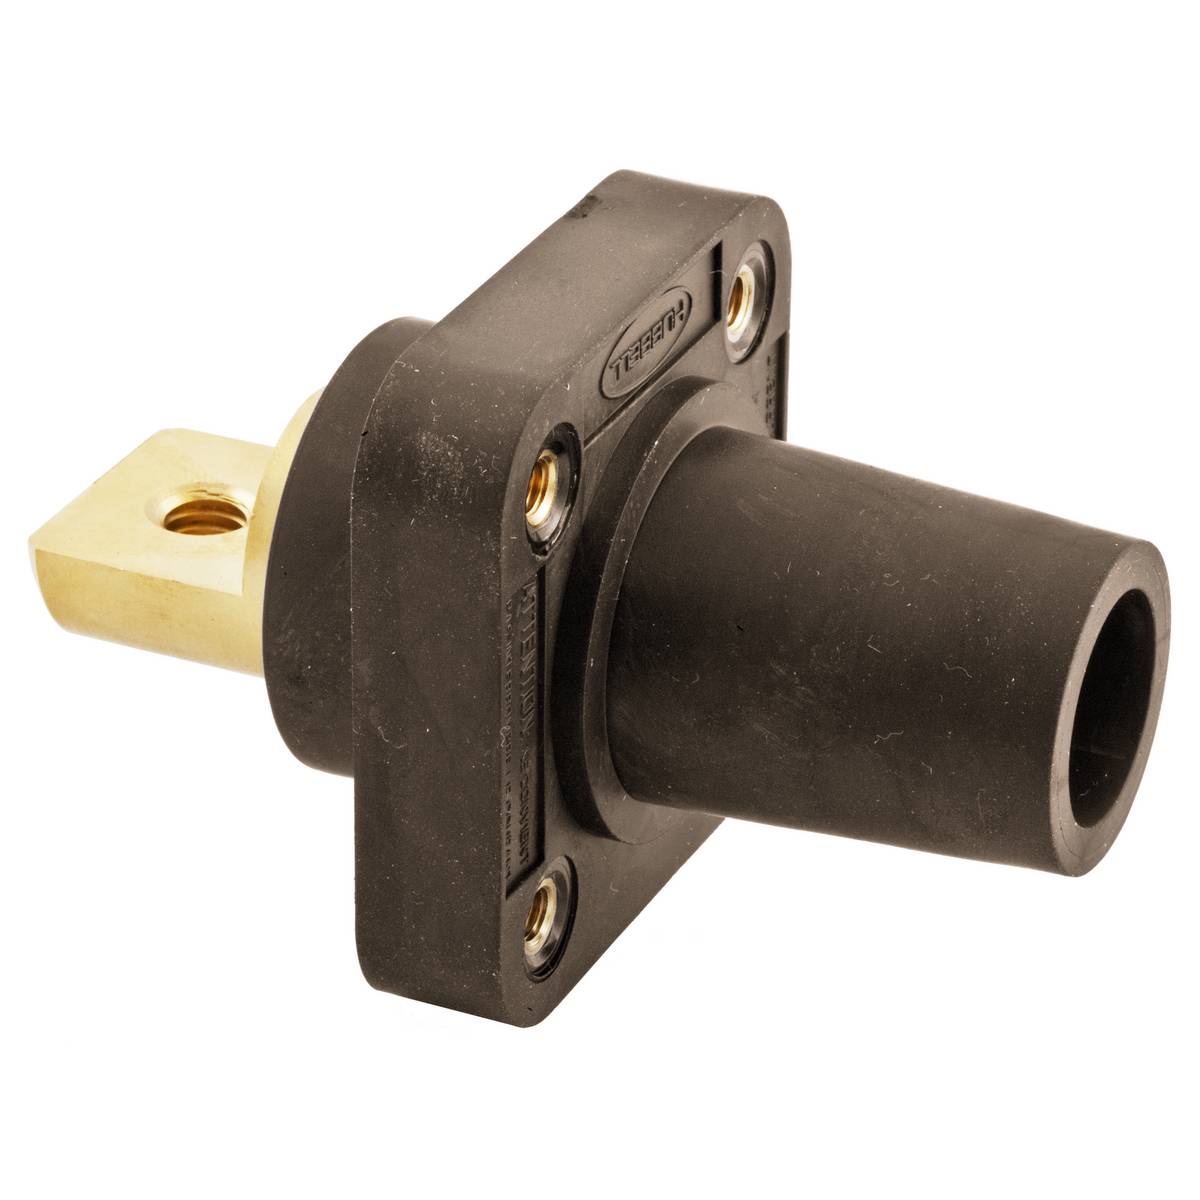 Bryant Electric Wiring Device-Kellems HBLFRBBN 16 Series Cam Type Heavy Duty Industrial Grade Single Pole Receptacle, 600/250 VAC/VDC, 300/400 A, 4 to 4/0 AWG Wire, Female/Busbar Connection, NEMA 3R/4X/12 NEMA Rating